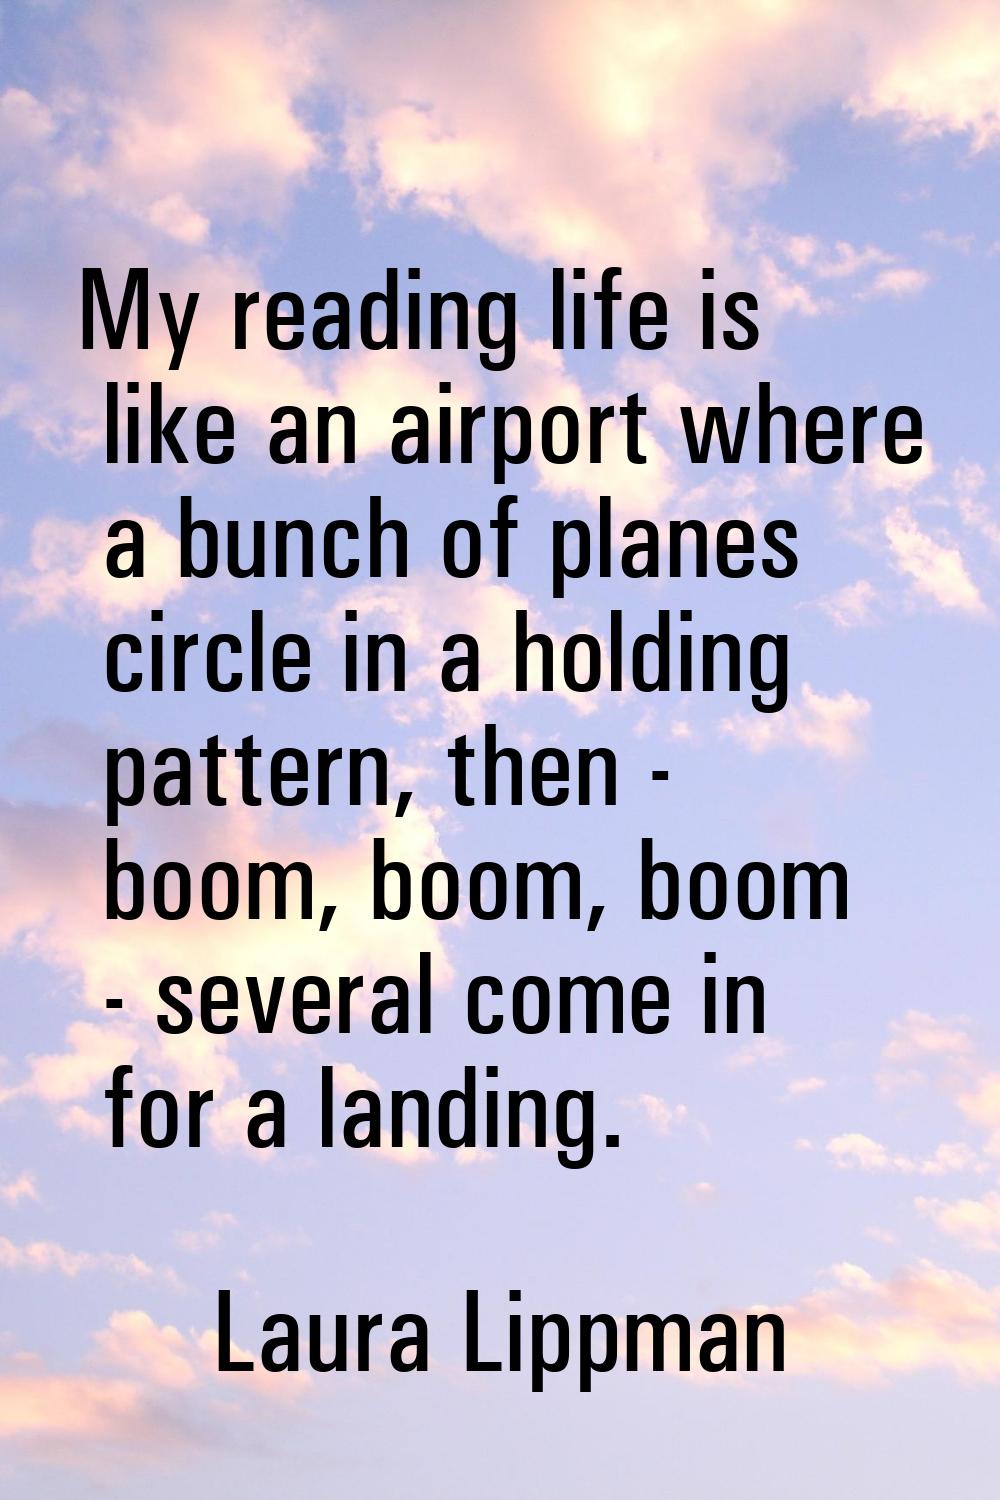 My reading life is like an airport where a bunch of planes circle in a holding pattern, then - boom